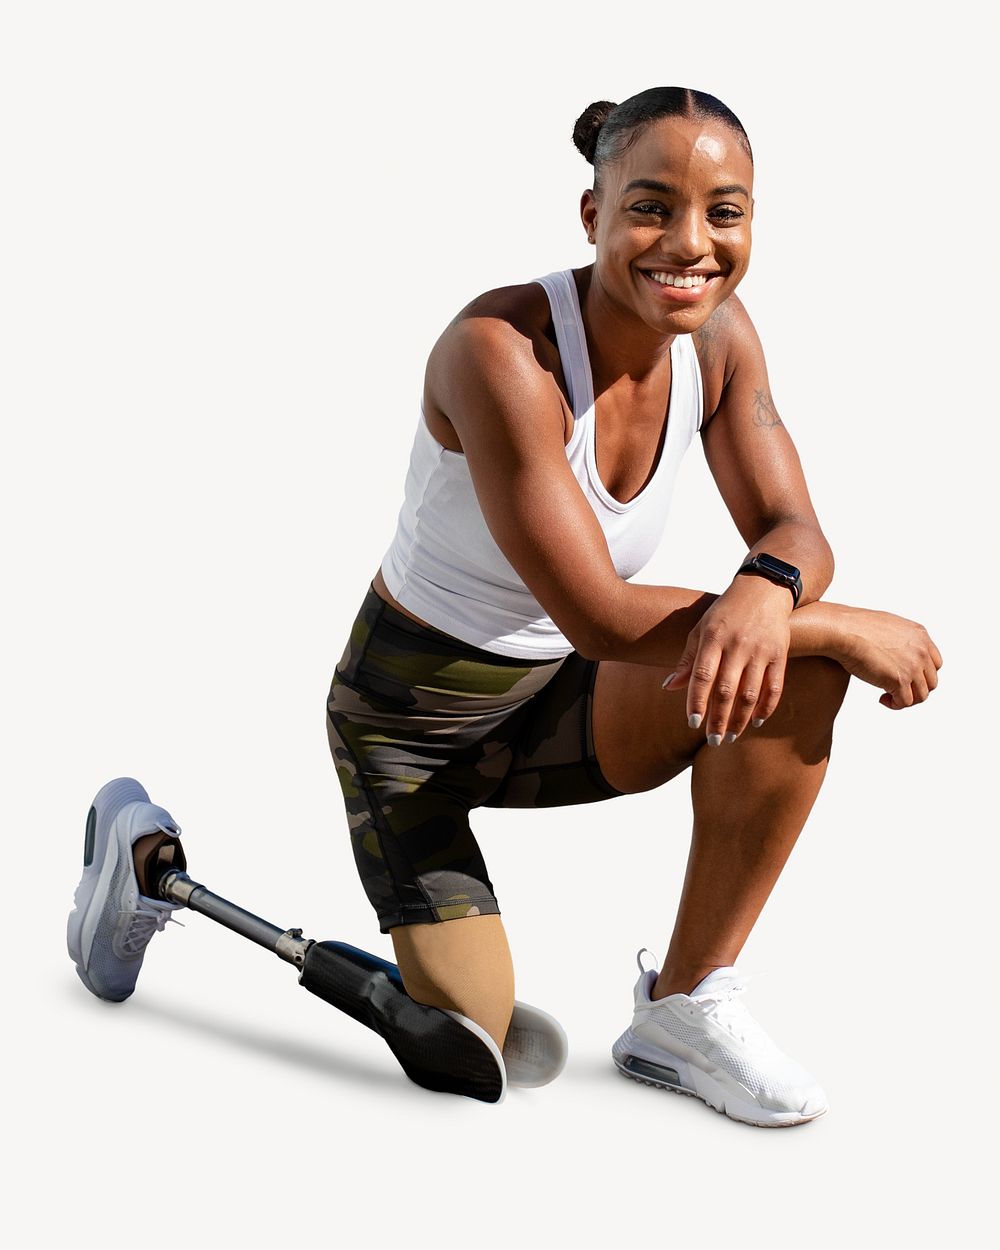 Smiling athlete with prosthetic leg kneeling down on the floor isolated design